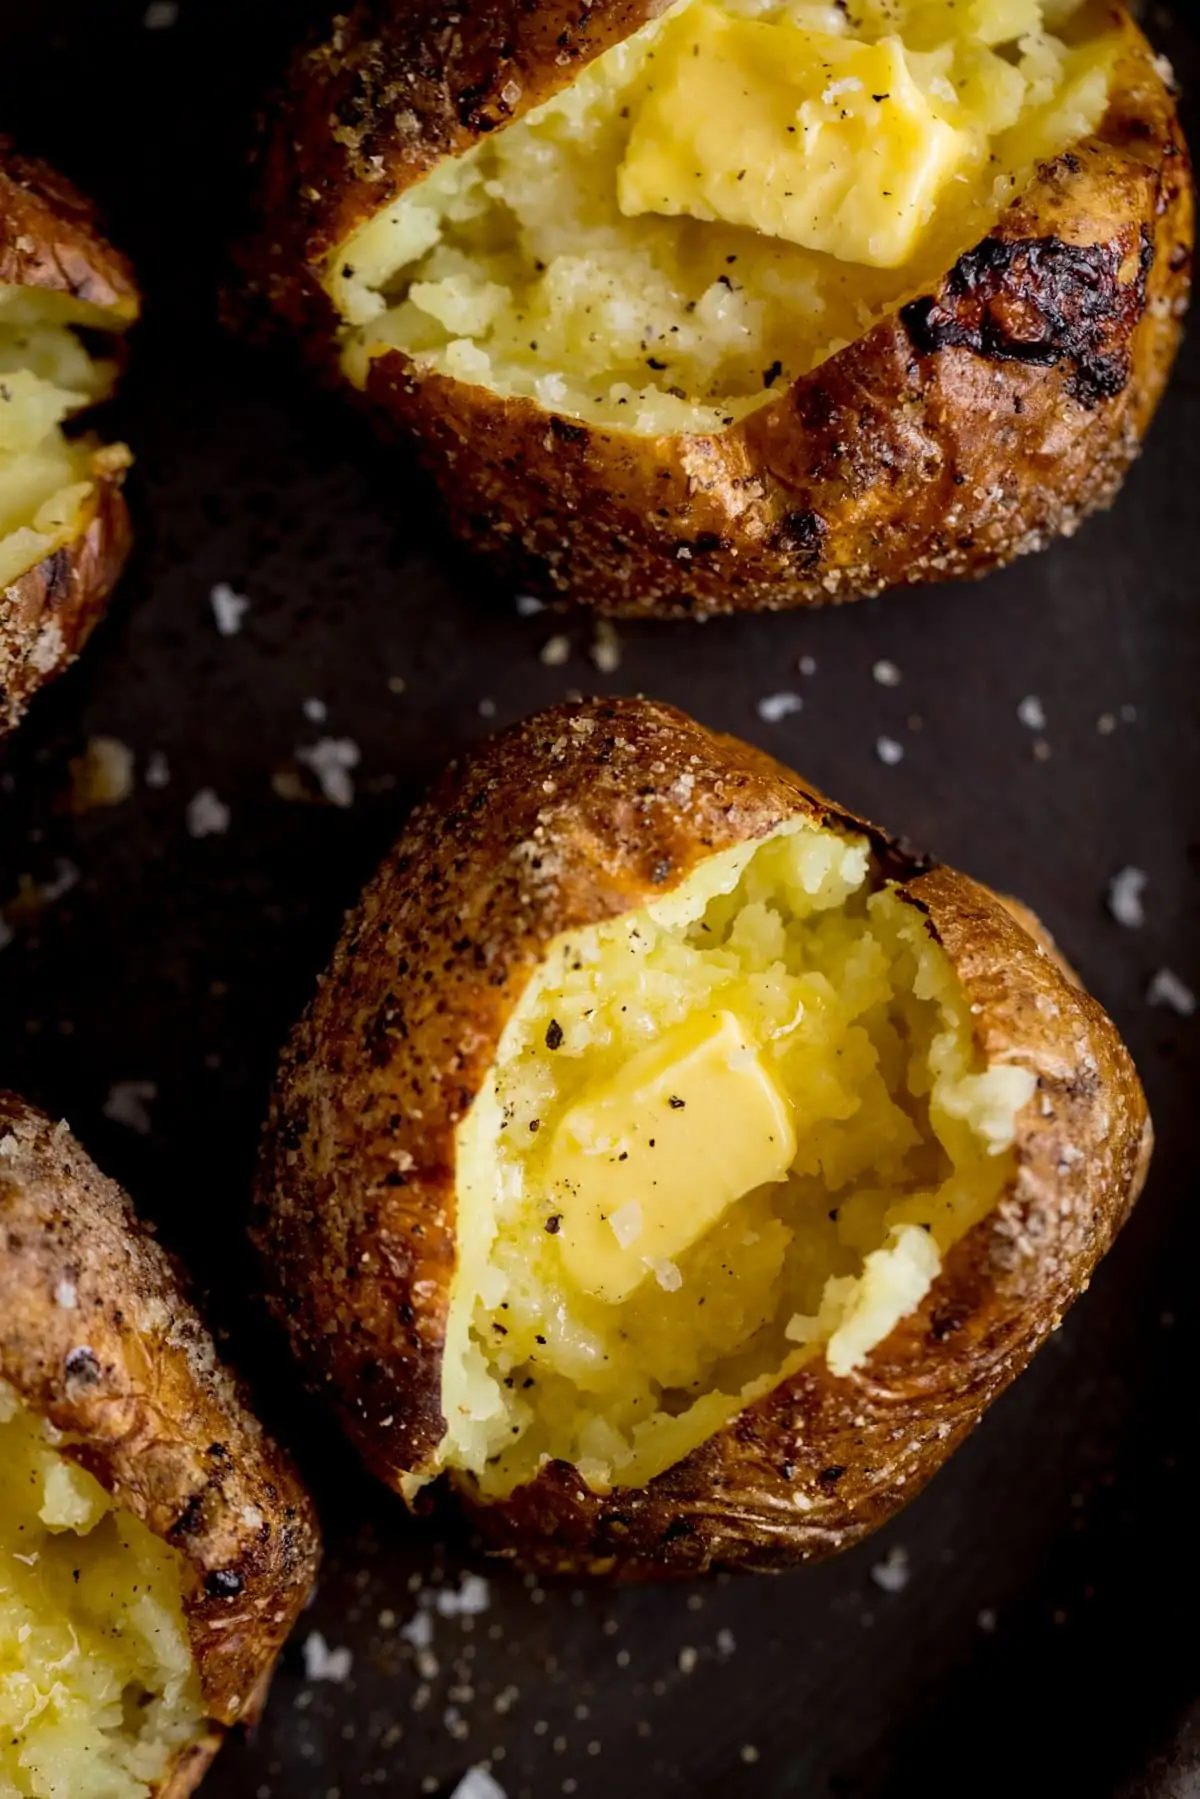 How to Make a Perfect Baked Potato (with a time saving trick!)